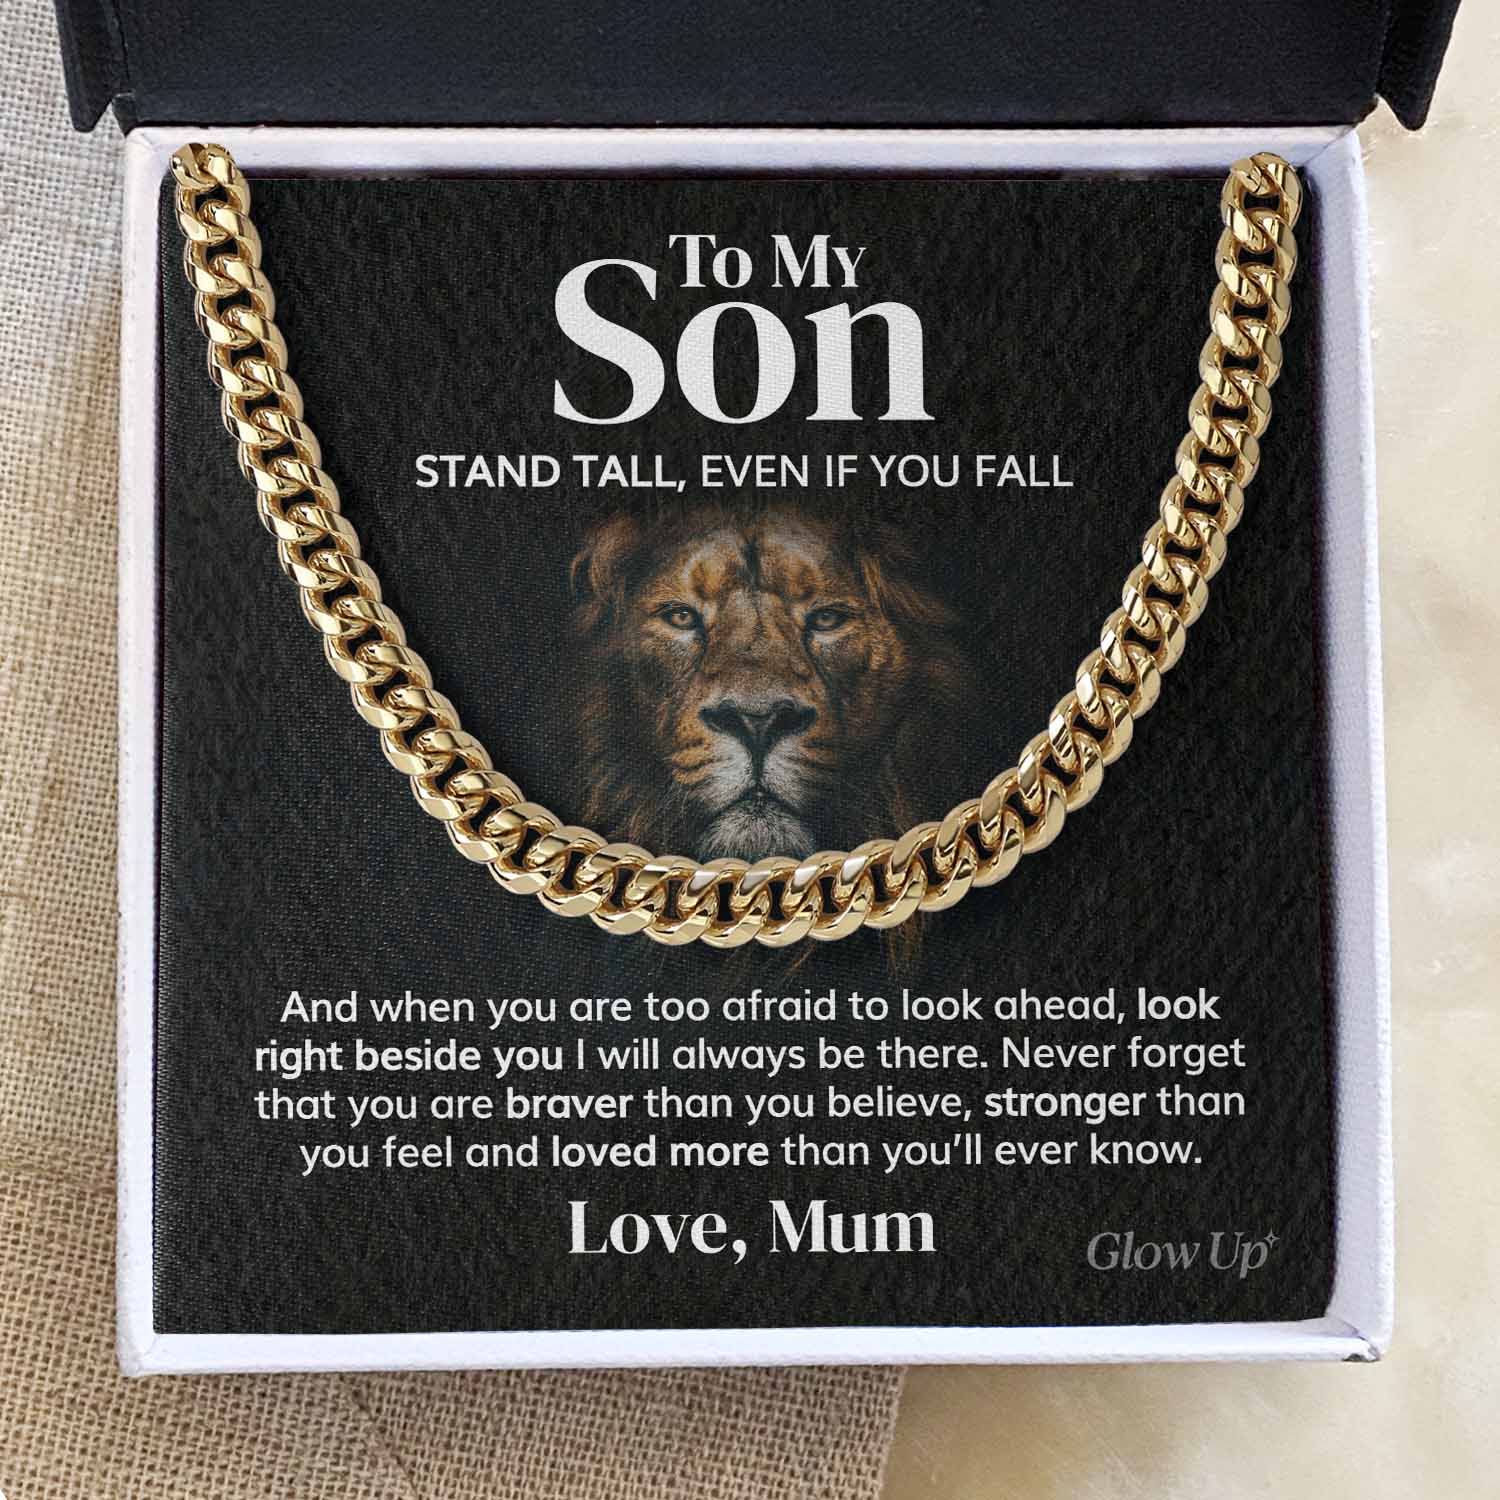 Glow Up Cuban Link Chain 18k Gold Over Stainless Steel / Two Toned Box To my Son from Mum - Cuban Link Chain - Stand Tall